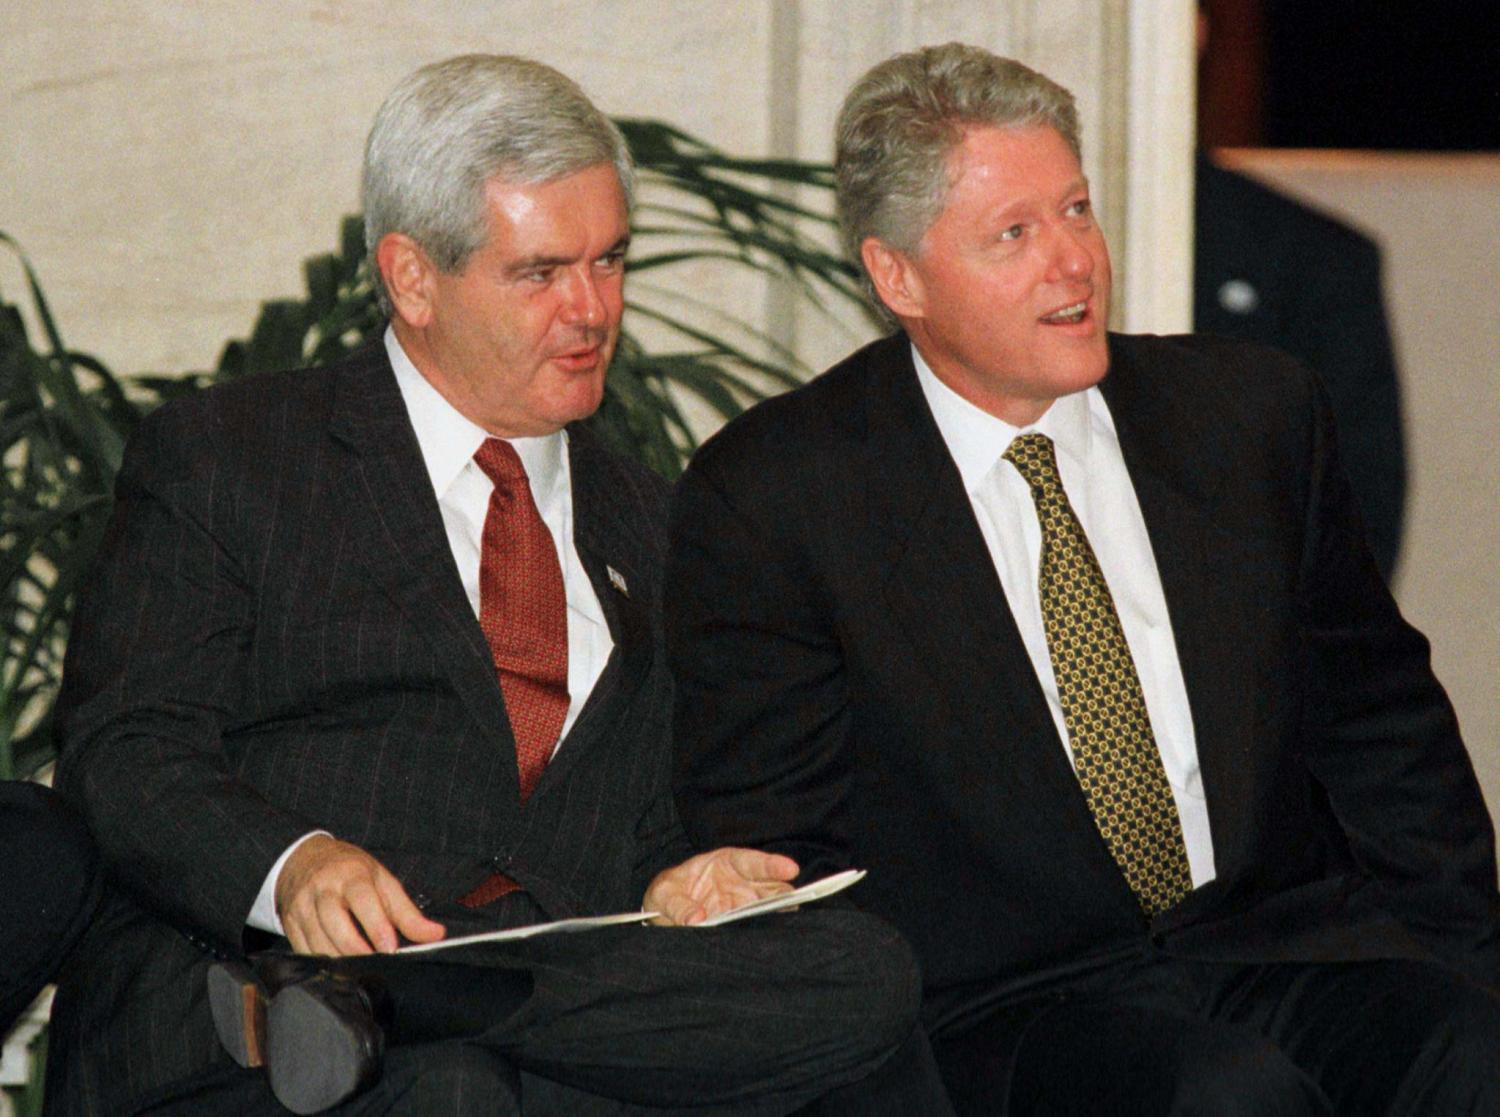 U.S. House of Representatives Speaker Newt Gingrich (L) and President Bill Clinton sit during ceremonies at the U.S. Capitol [honouring South African President Nelson Mandela] September 23. Gingrich said earlier that it was too early to talk of compromise with the White House and that the impeachment investigation of Clinton should continue. - PBEAHUMGBCS